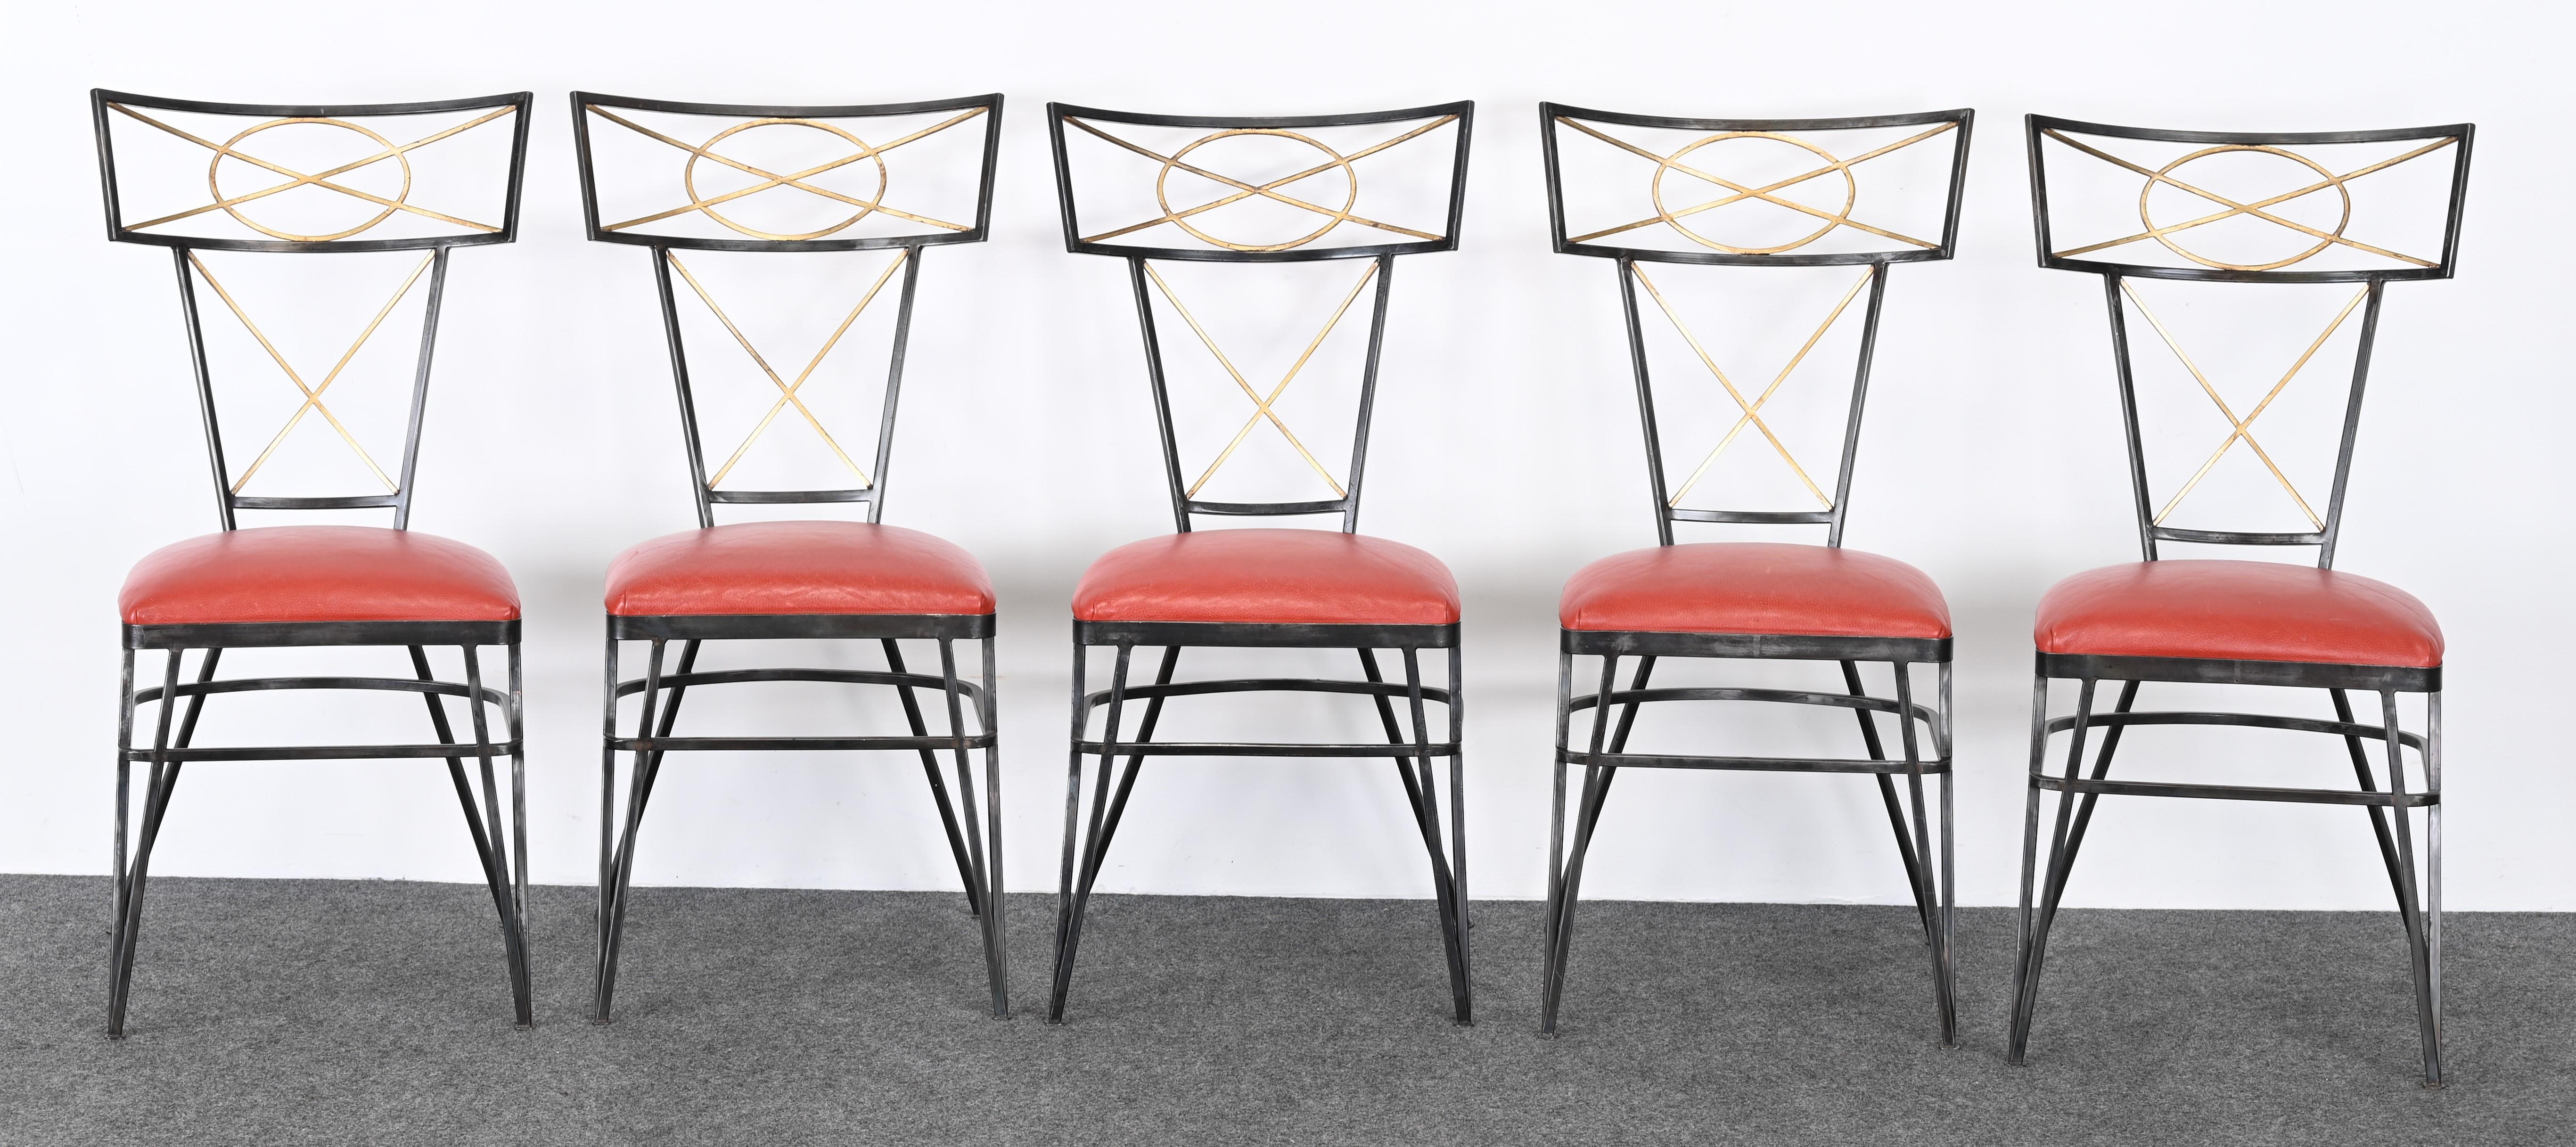 Set of Ten Steel and Gold Gilt Neoclassical Chairs, 20th Century For Sale 3